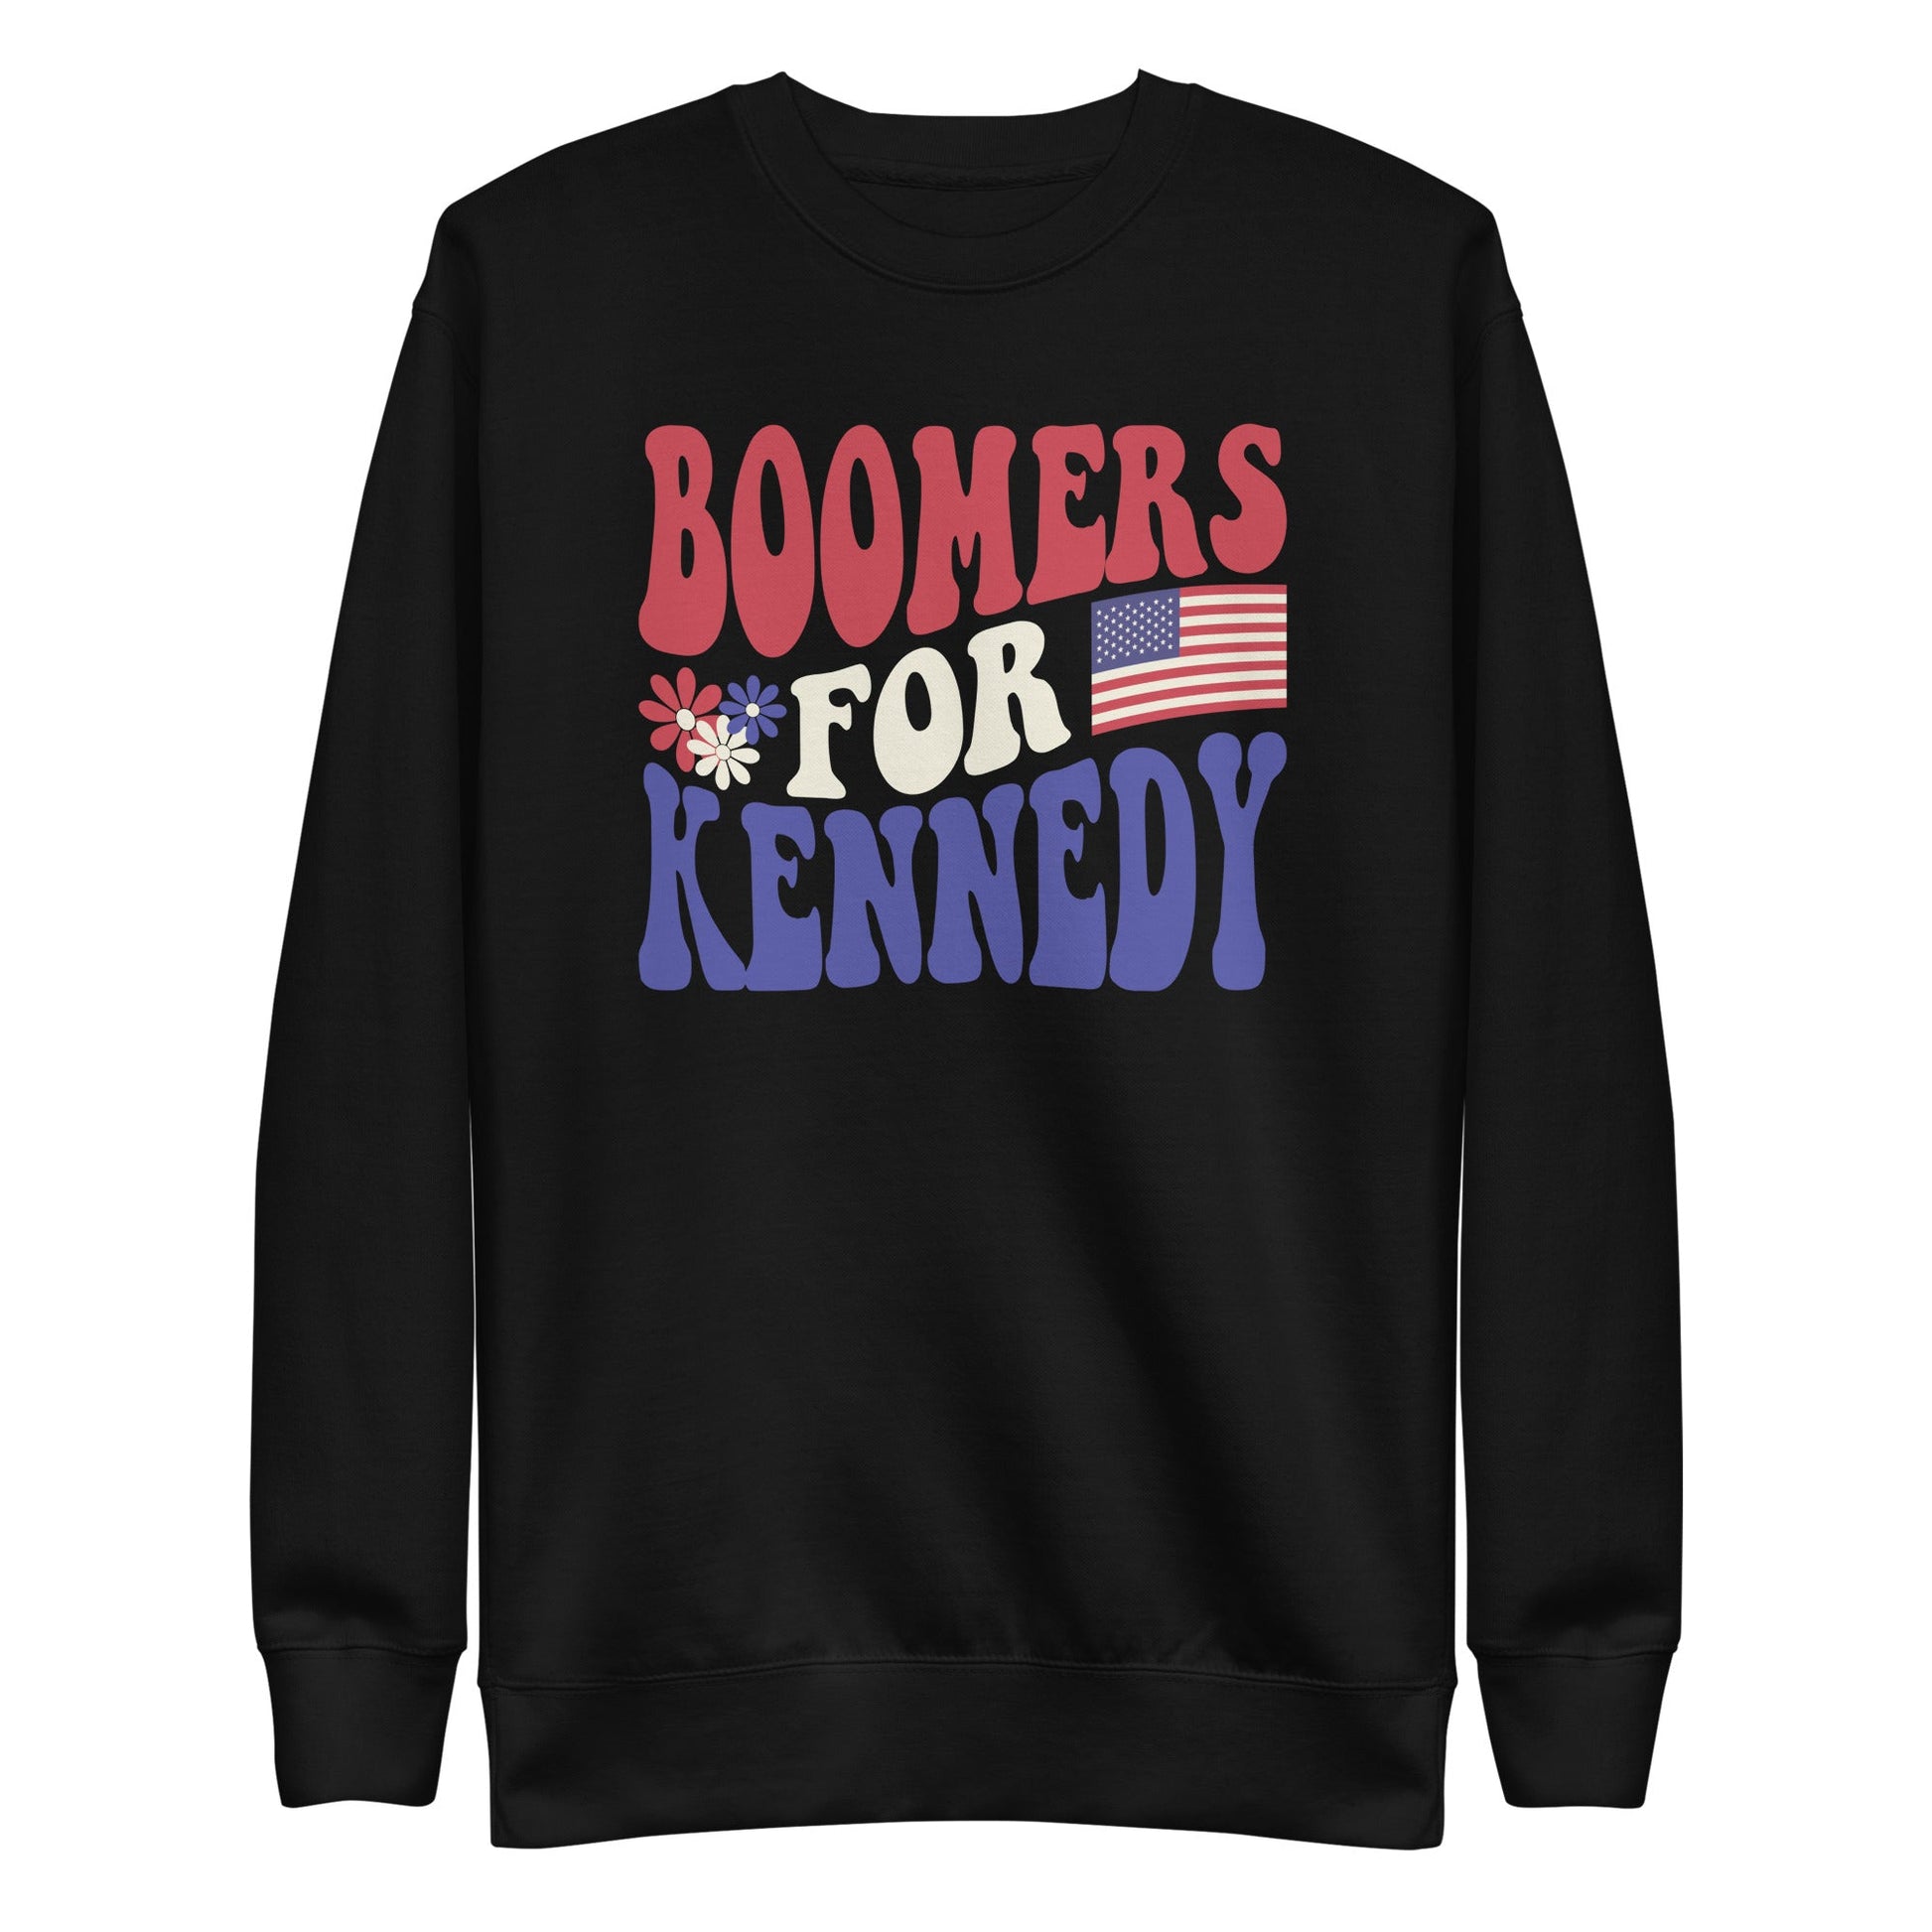 Boomers for Kennedy Unisex Sweatshirt - TEAM KENNEDY. All rights reserved